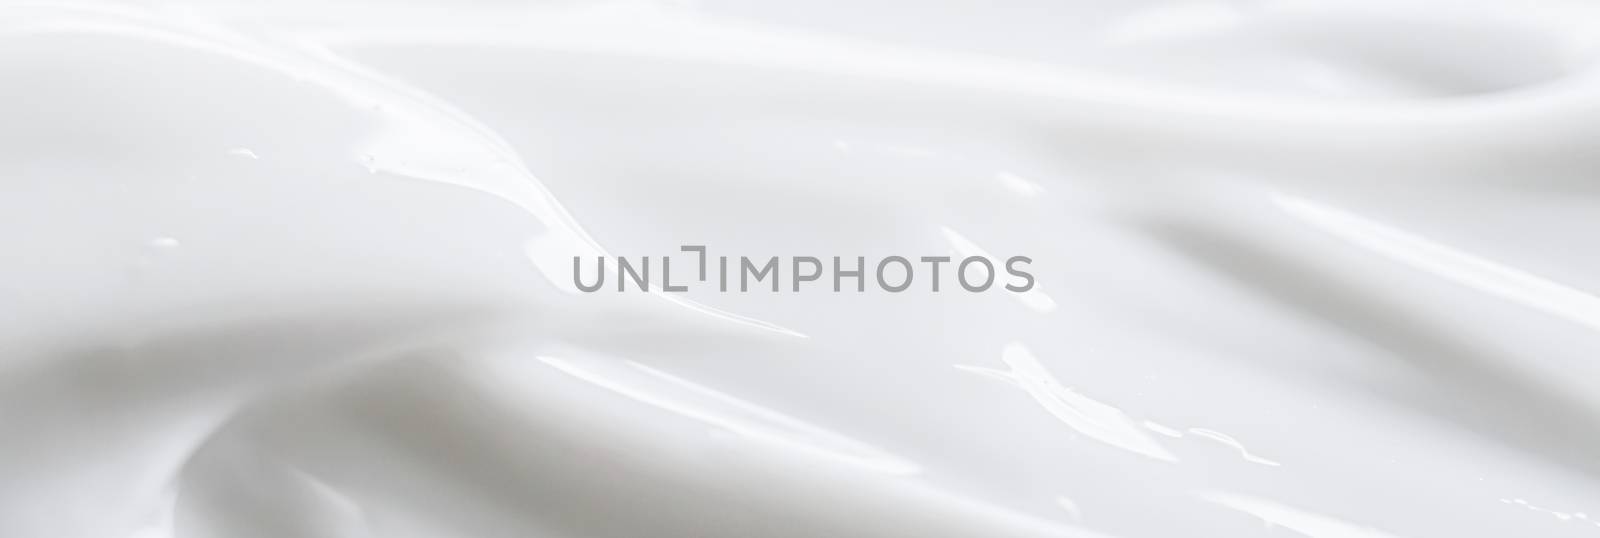 Pure white cream texture as abstract background, food substance or organic cosmetics